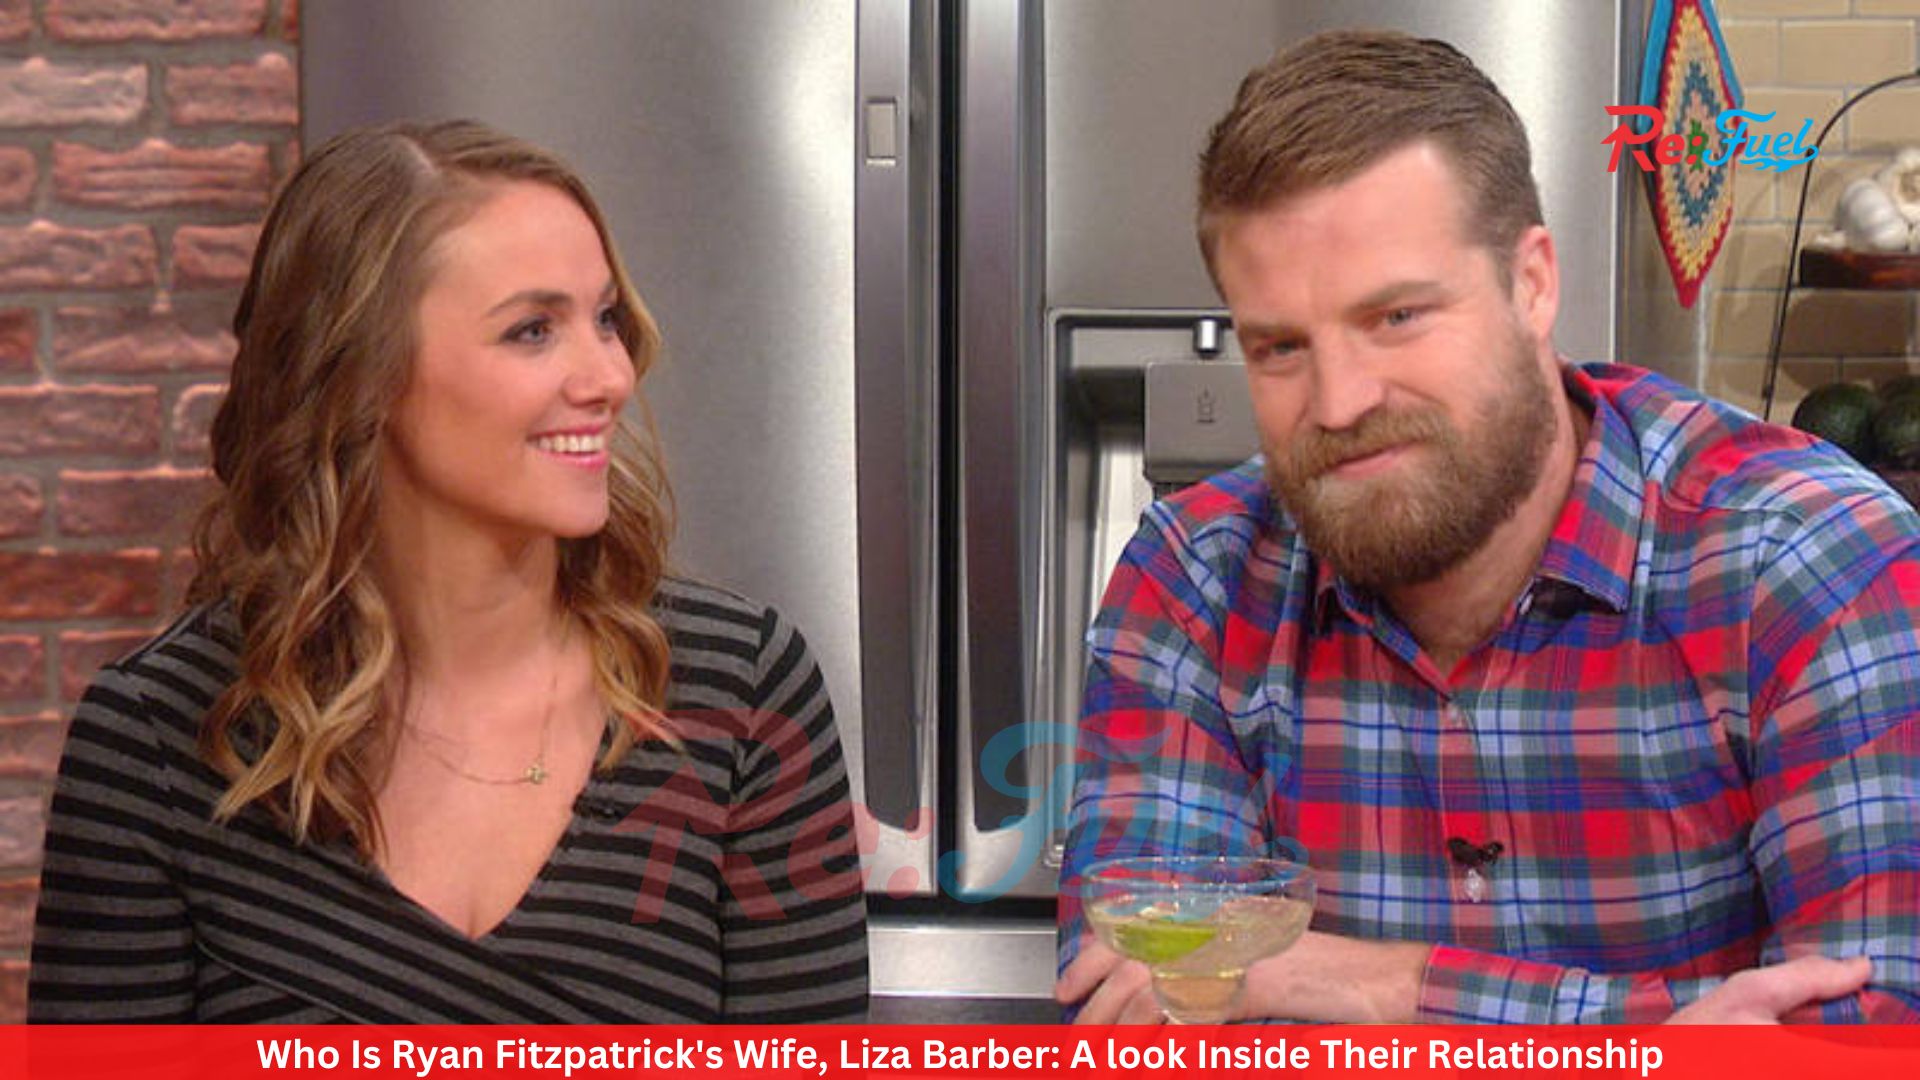 Who Is Ryan Fitzpatrick's Wife, Liza Barber: A look Inside Their Relationship